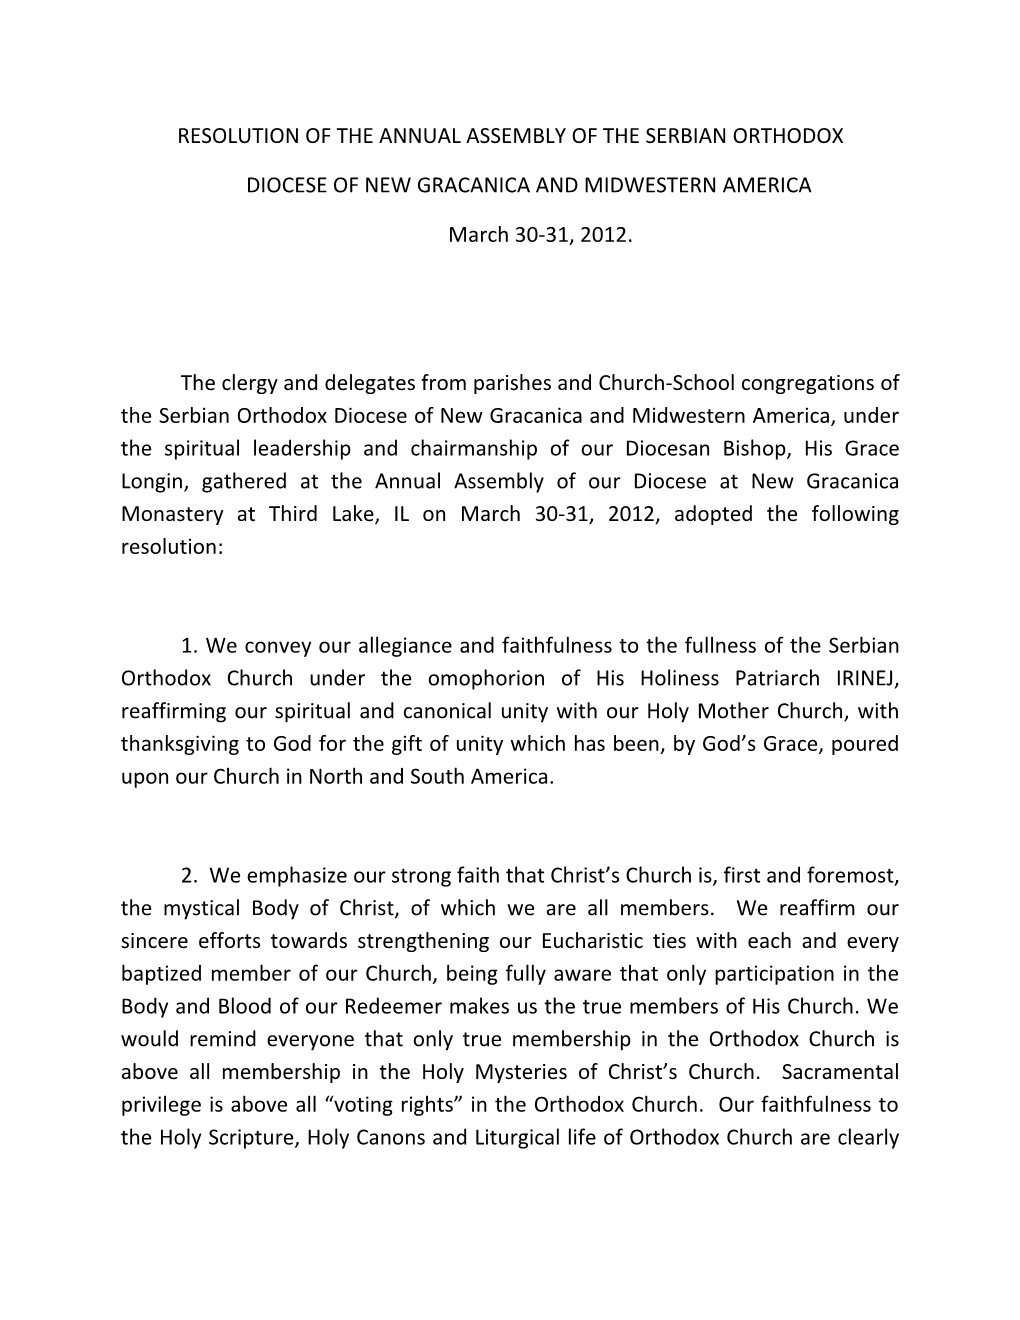 Resolution of the Annual Assembly of the Serbian Orthodox